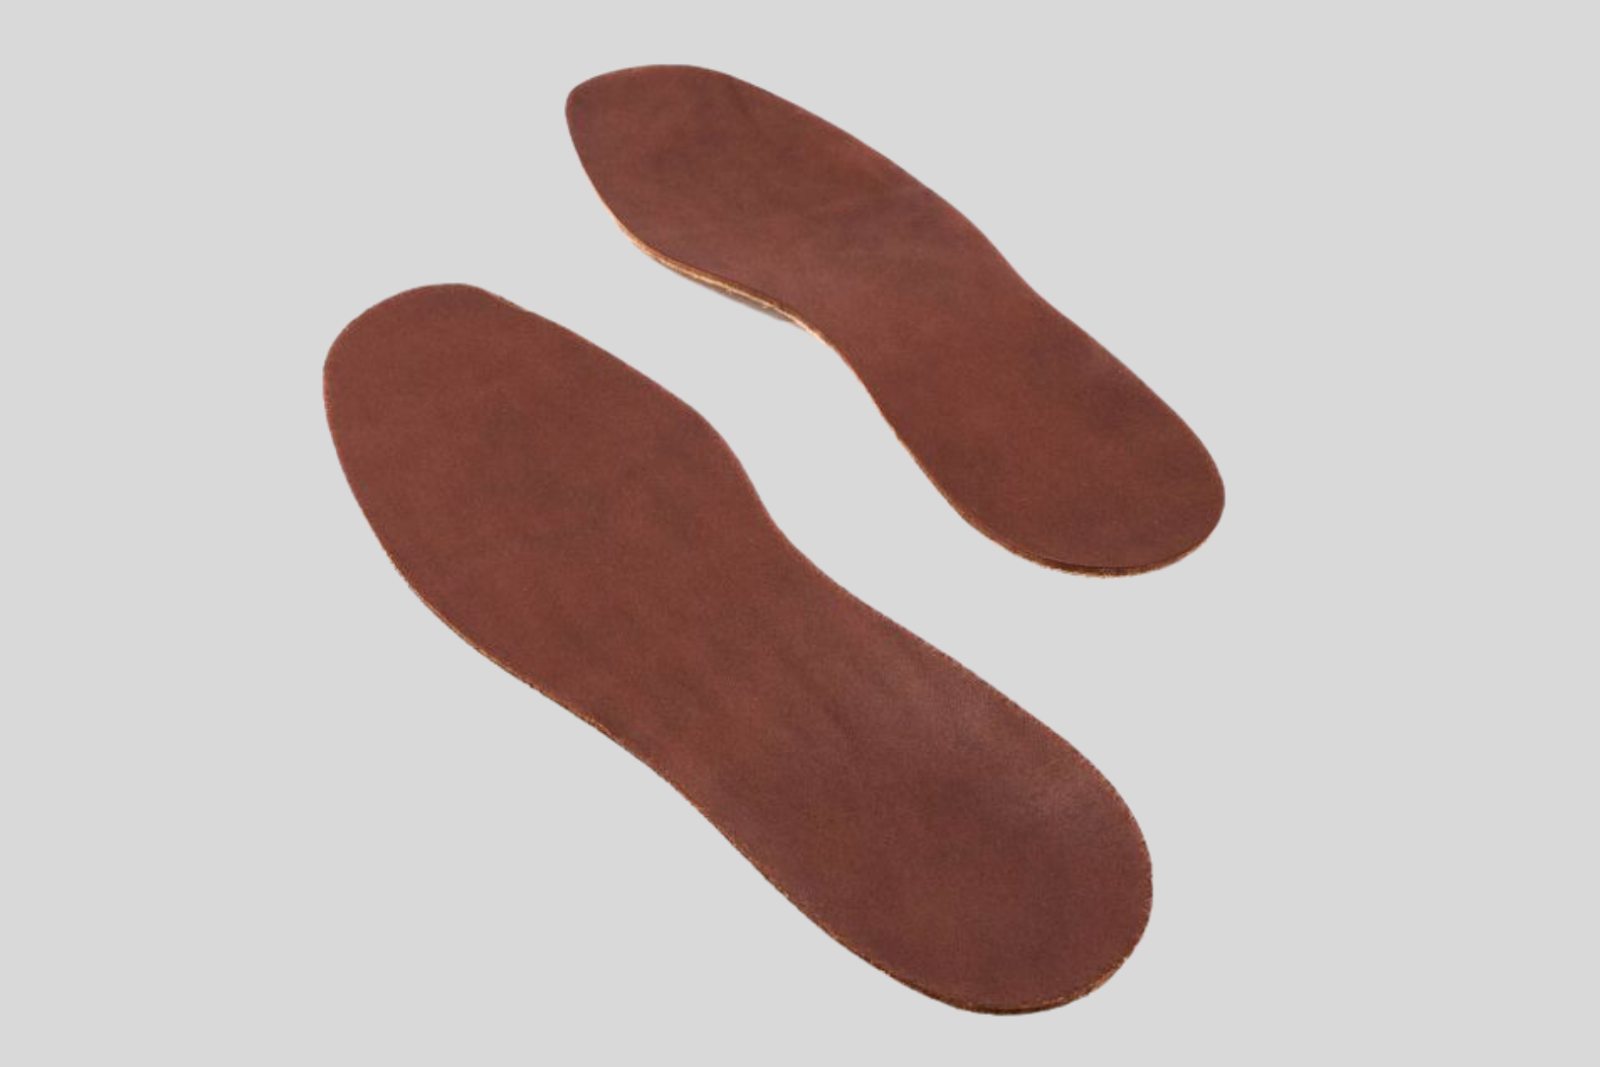  Nicks Leather Insoles